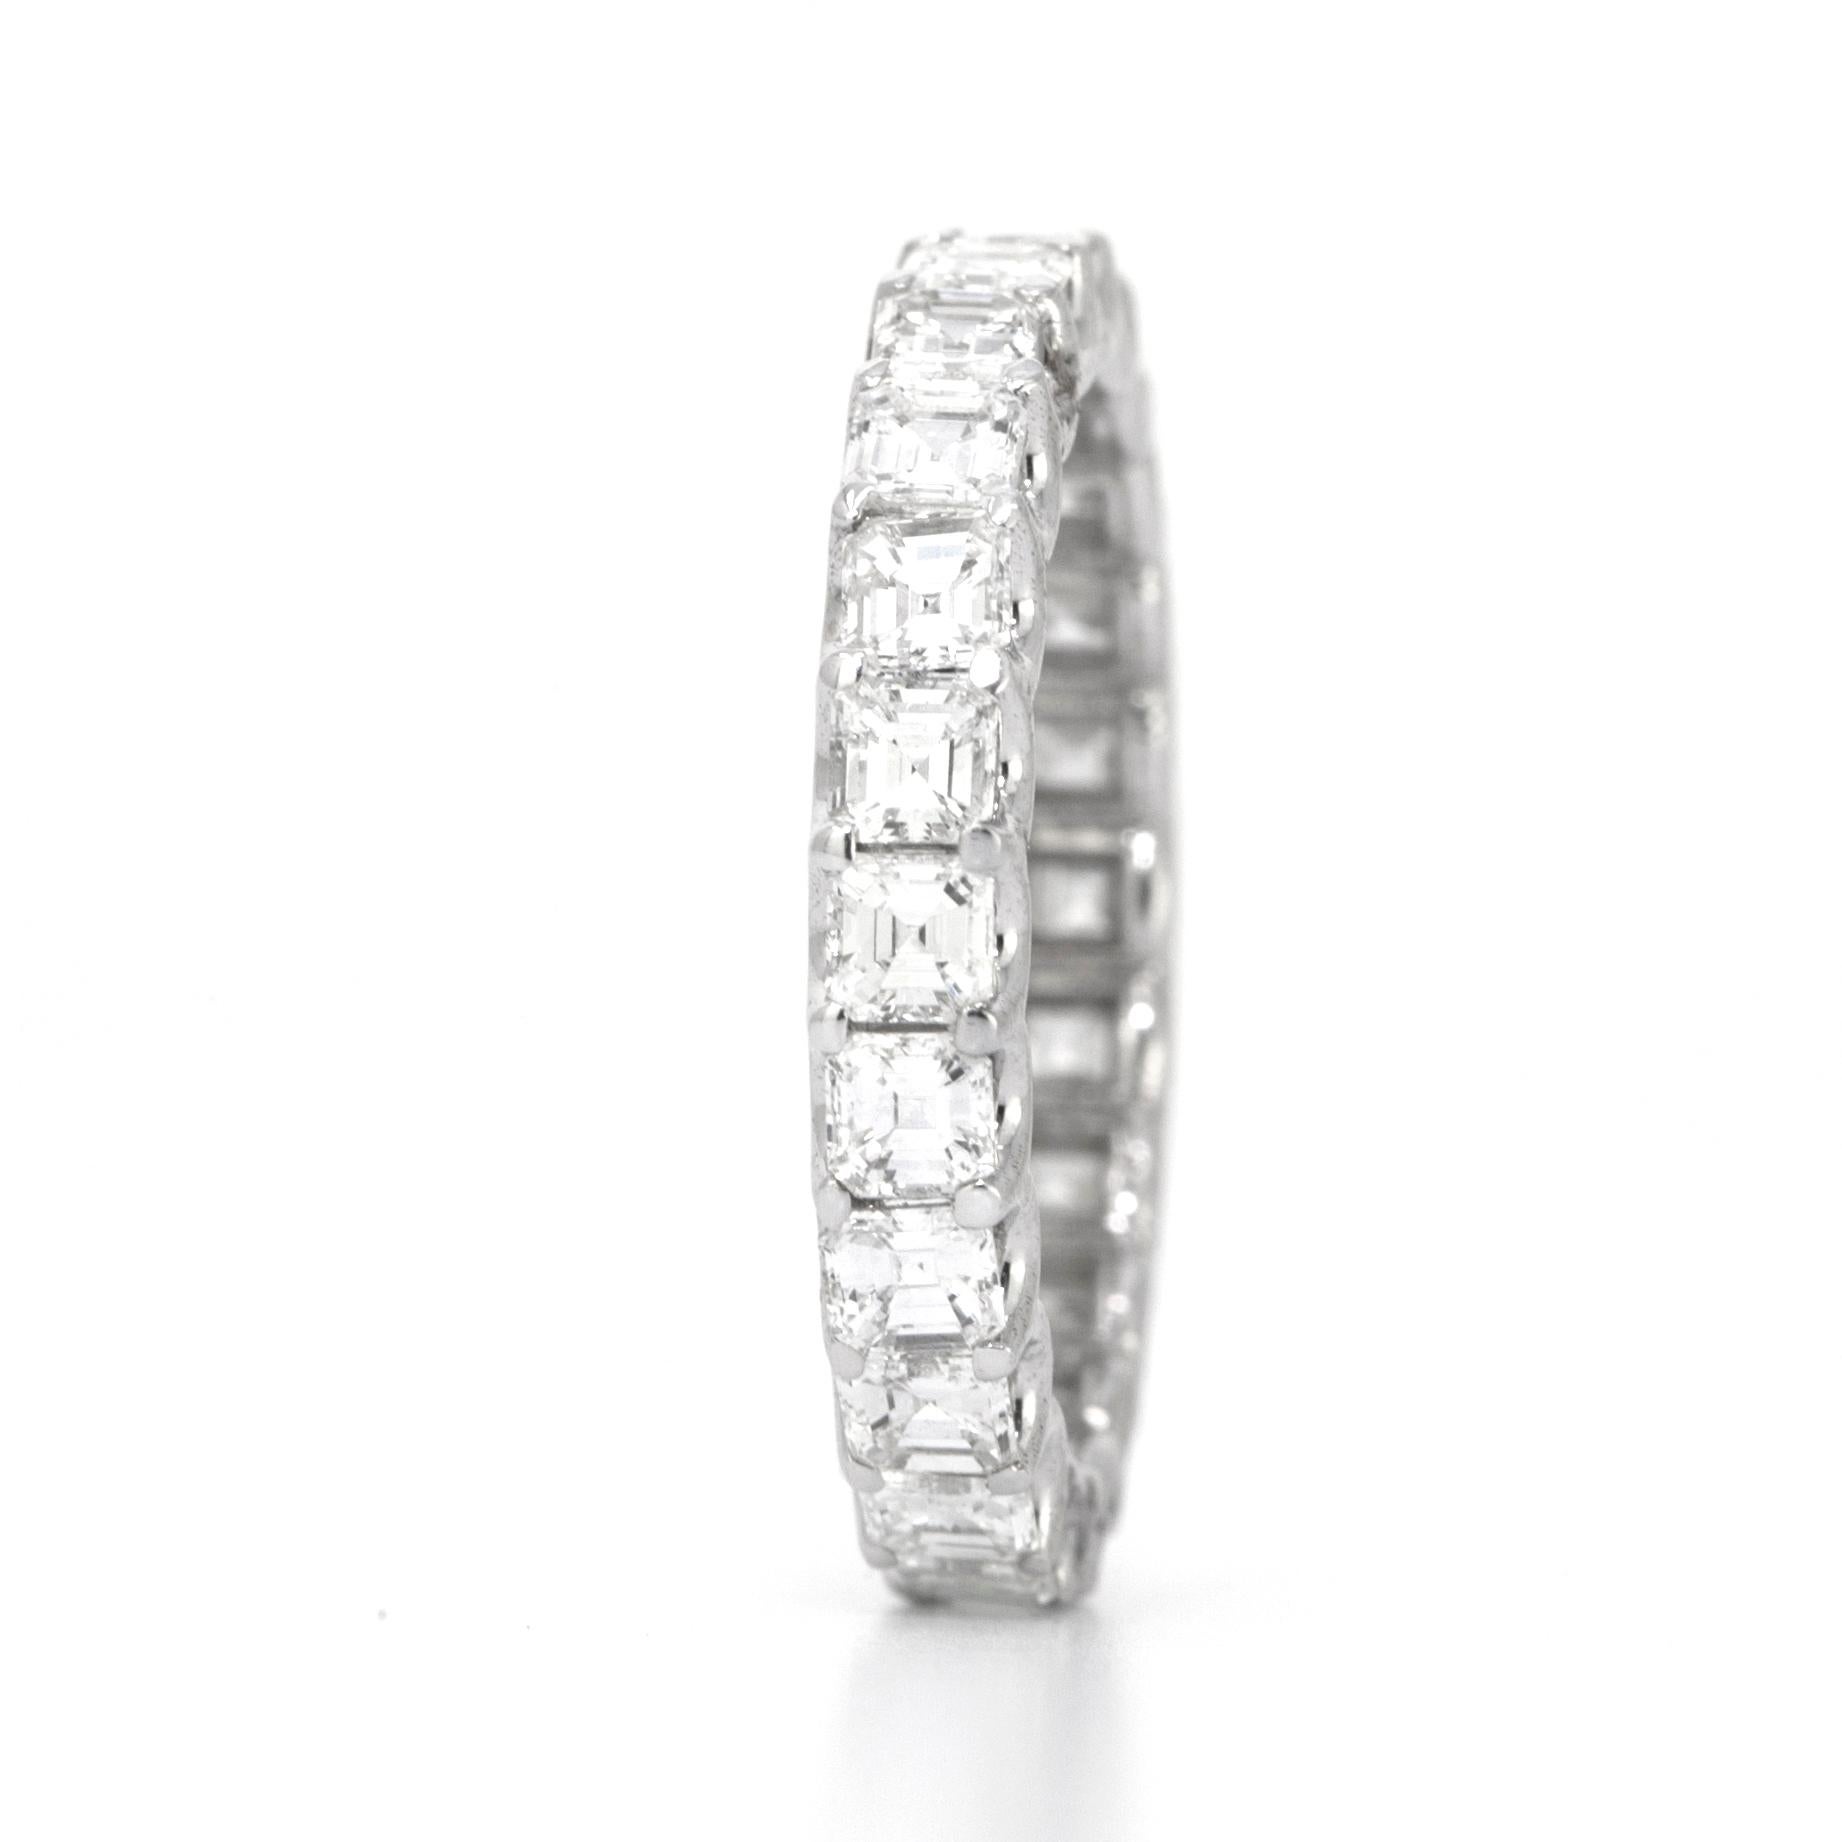 18K white gold eternity ring set with 24 asscher cut (square emerald cut) diamonds with total weight of 2.24 carats.
Diamonds are F/G in color and VS in clarity
Size: 6
Every Upper-Luxury piece will arrive in an elegant jewelry box.
